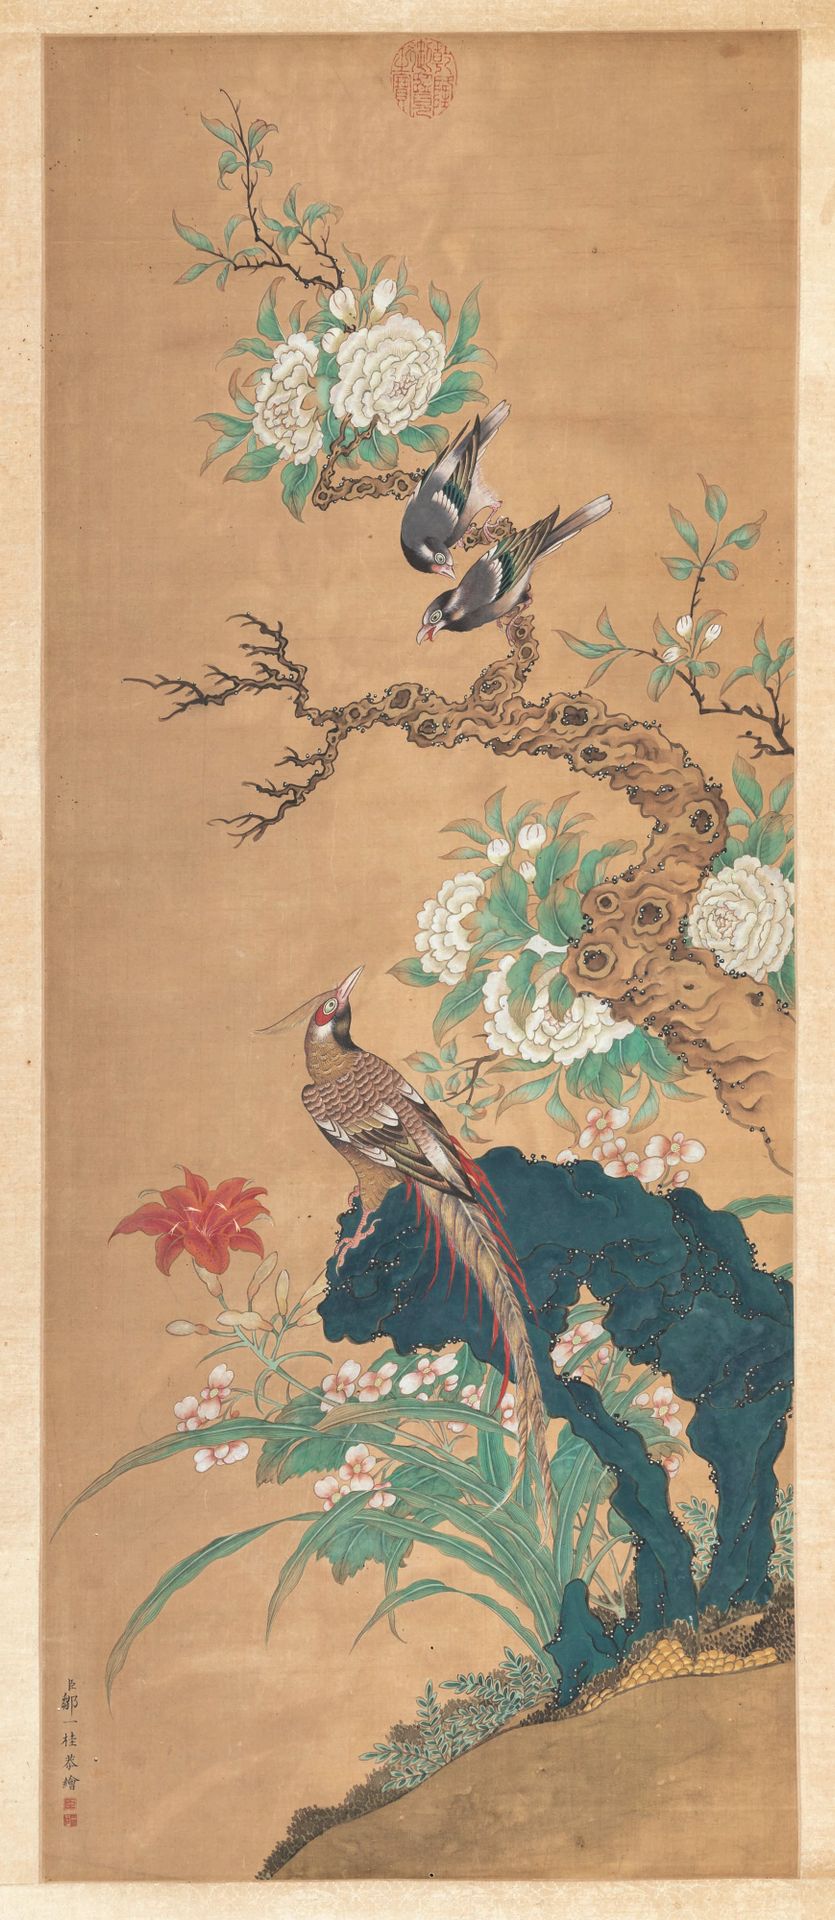 A painting on silk, China, Qing Dynasty 1800s, W. 39 - H. 96 Cm